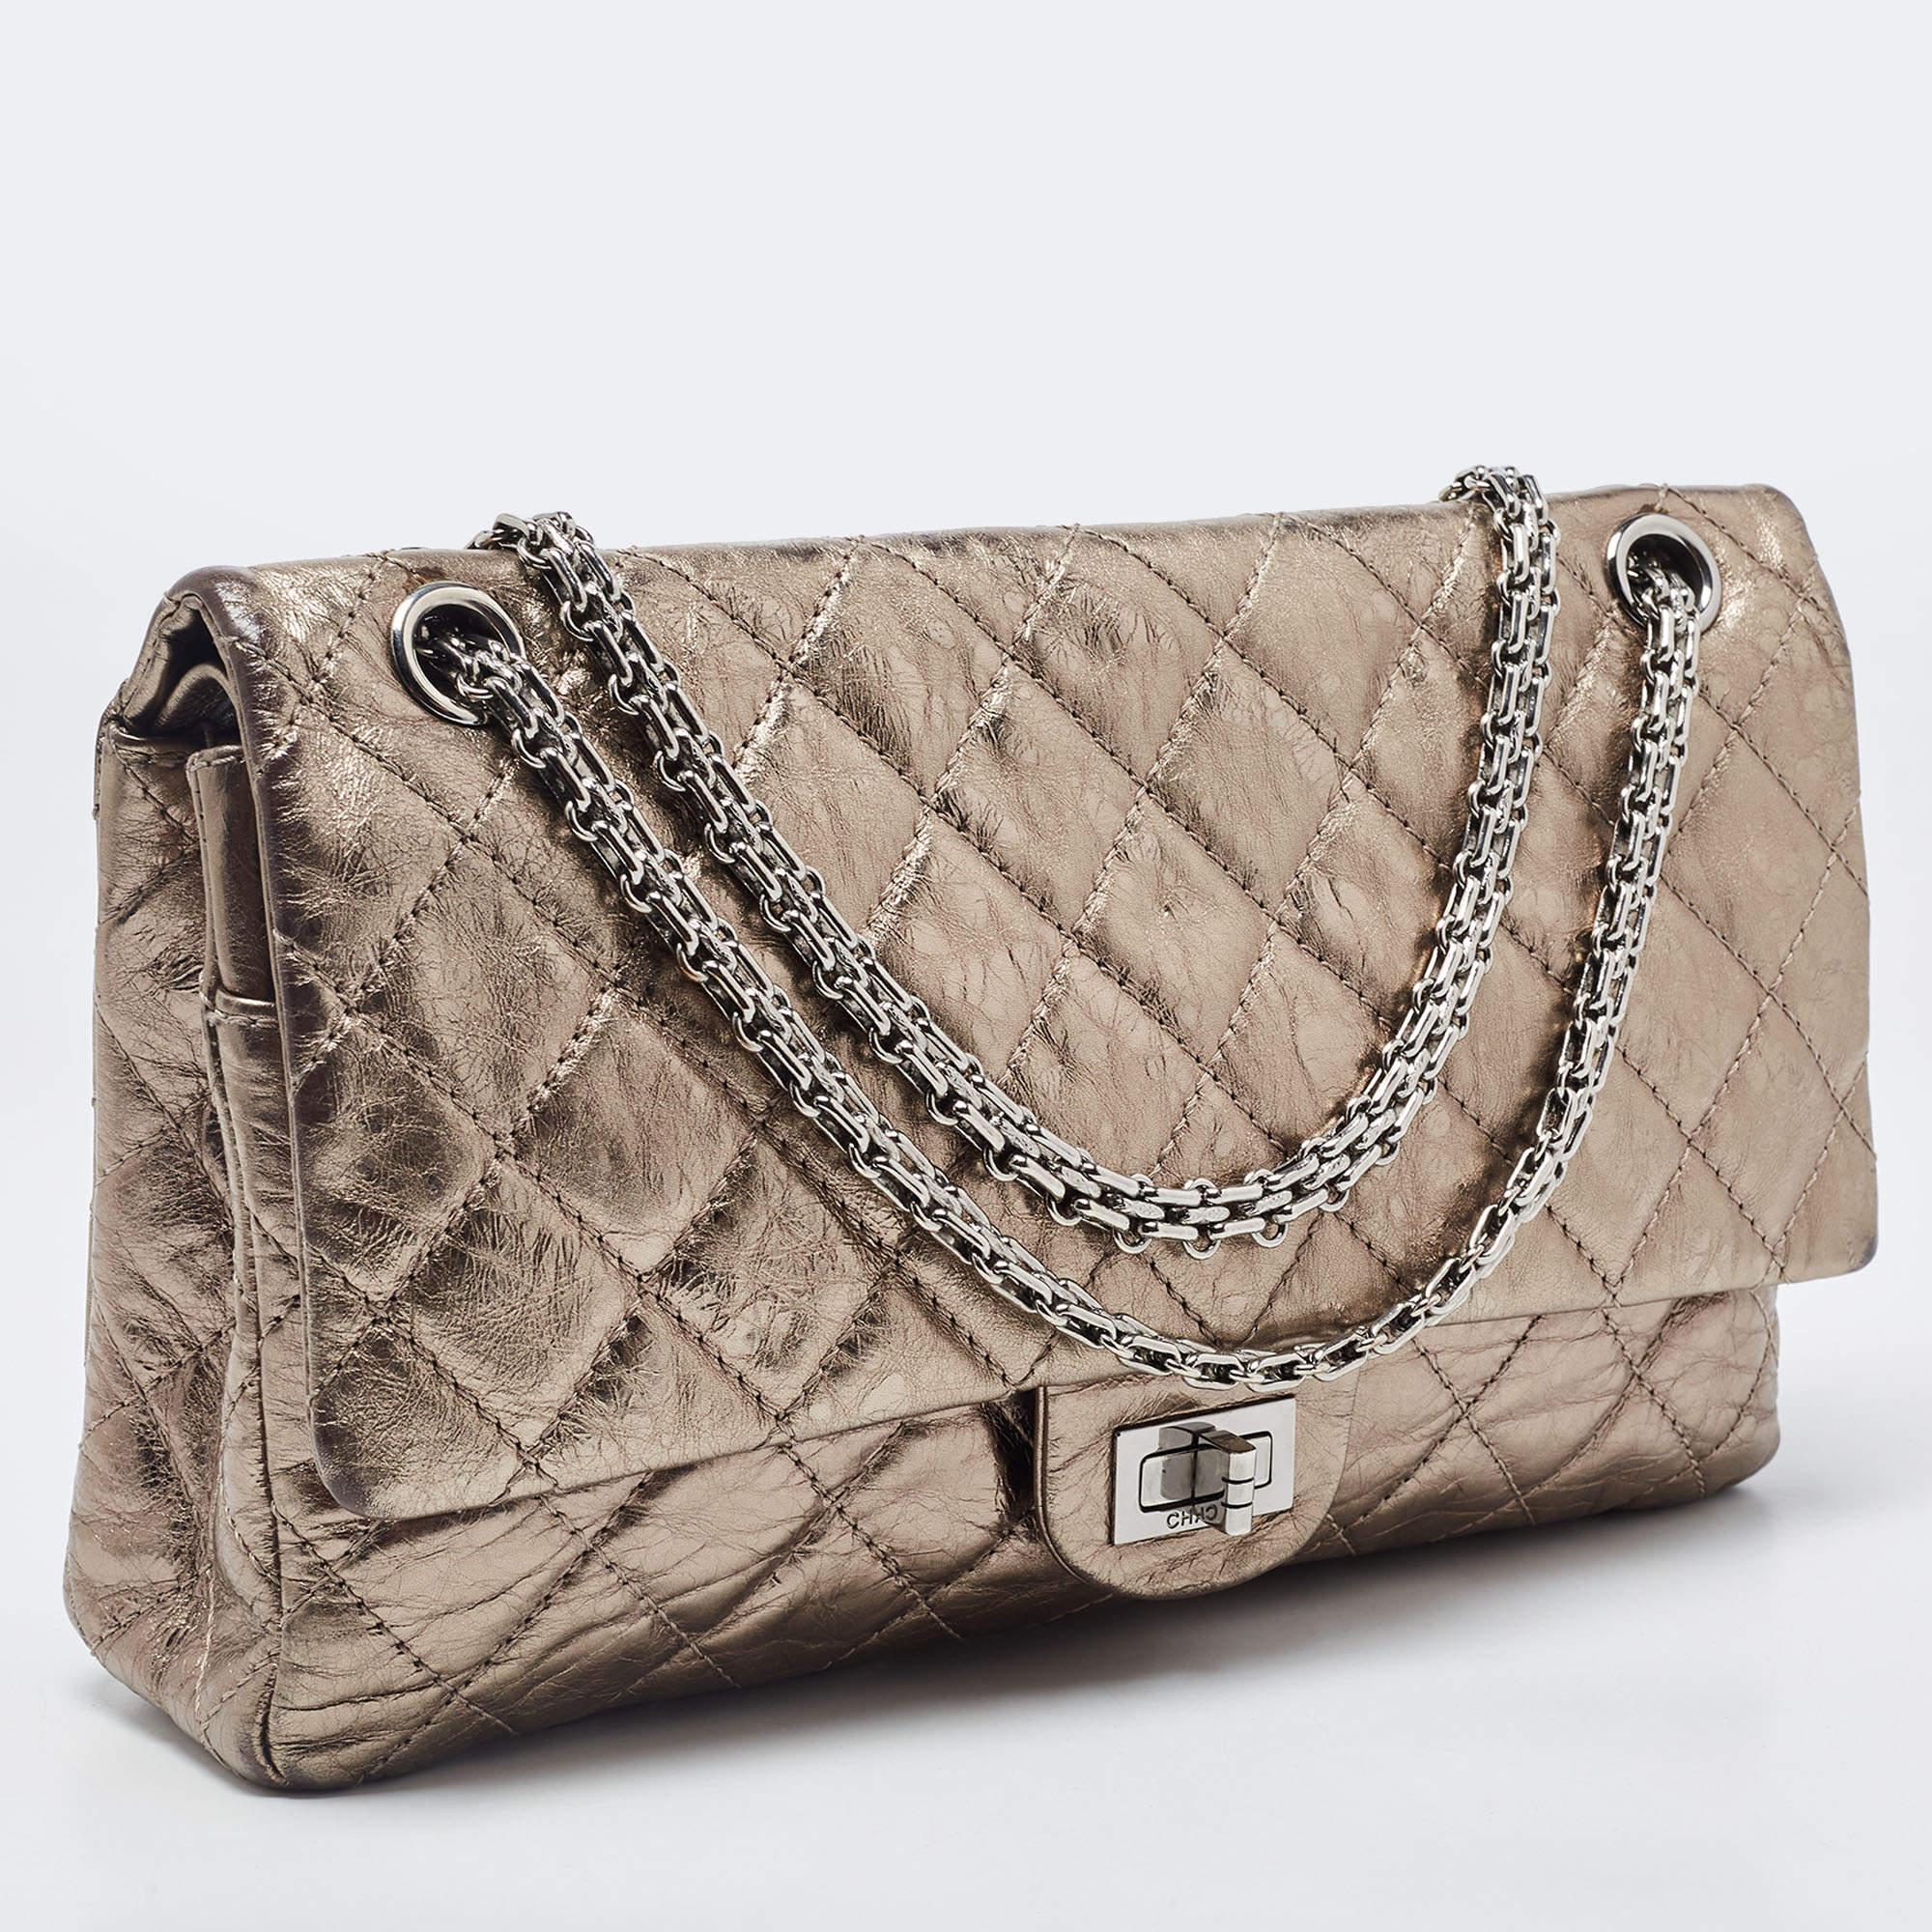 Brown Chanel Metallic Quilted Aged Leather Reissue 2.55 Classic 226 Flap Bag For Sale